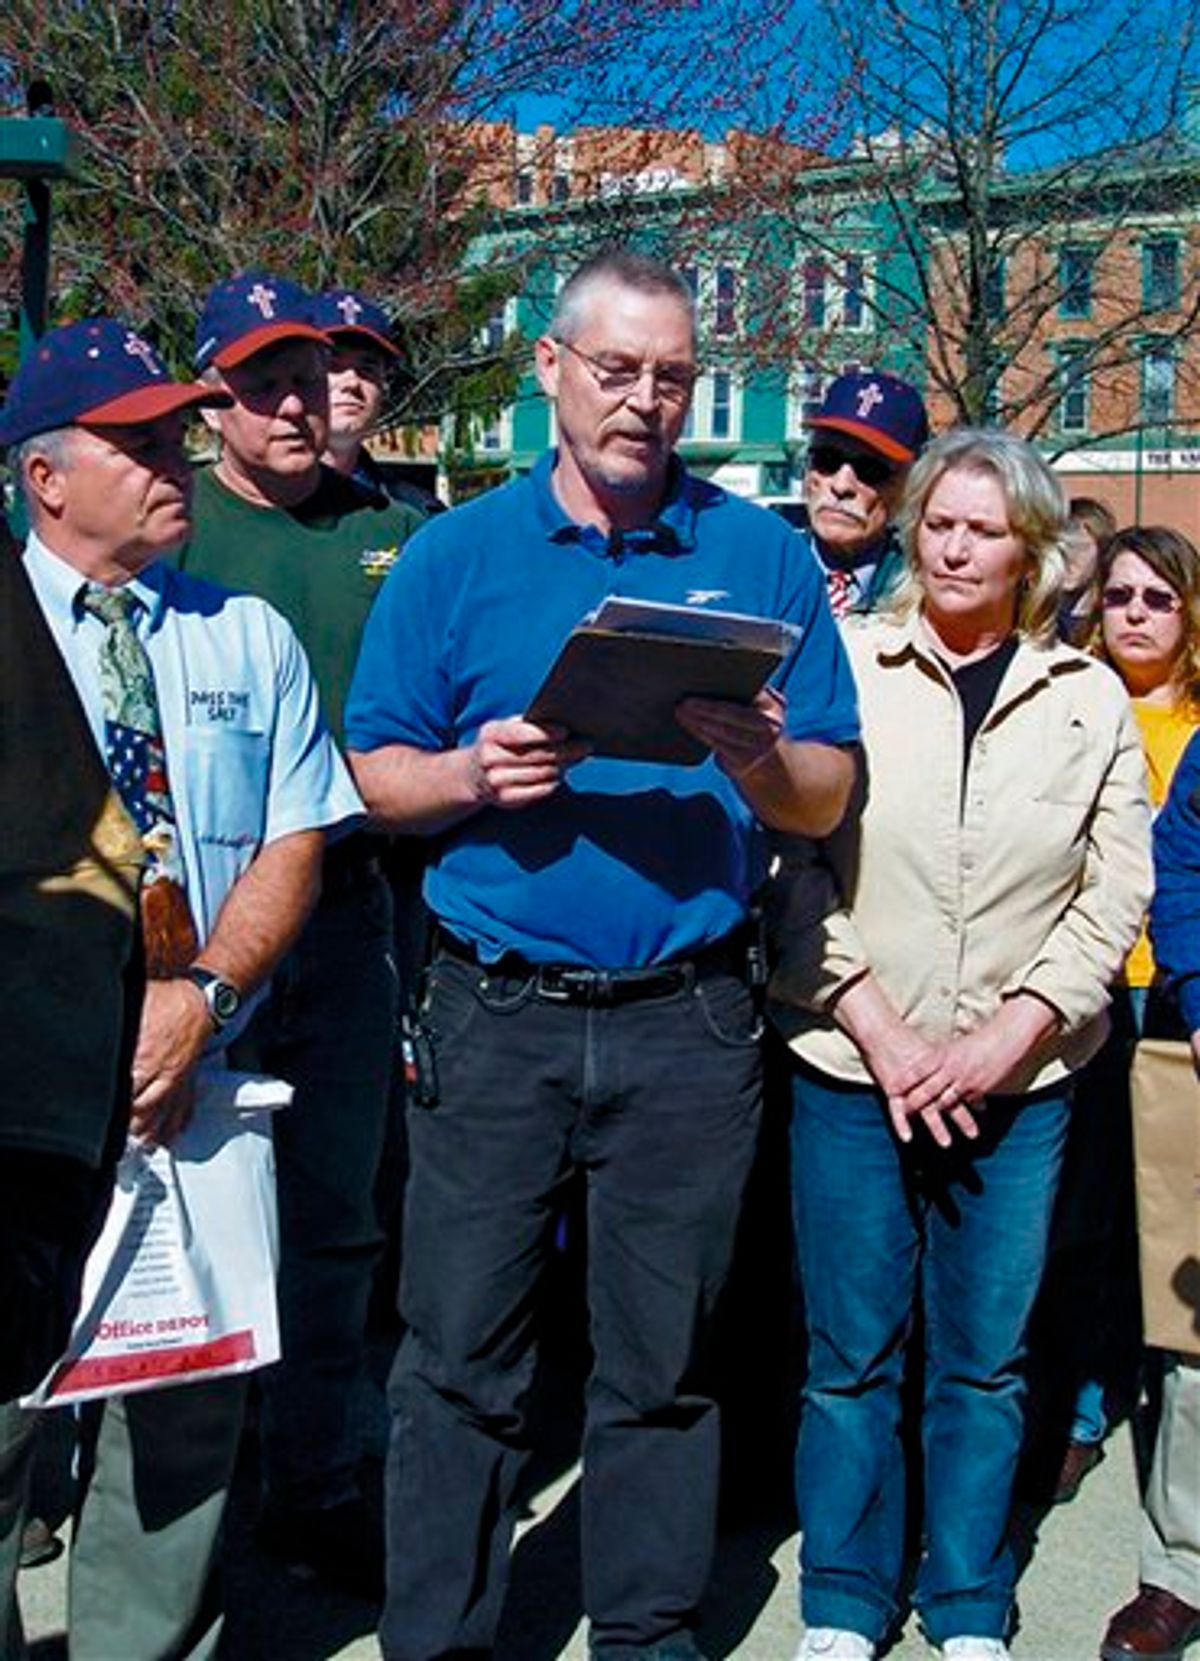 FILE - In this April 16, 2008 file photo, John Freshwater, center, addresses a crowd on Mount Vernon's public square in Mount Vernon, Ohio. The Ohio Supreme Court is ready to hear arguments in the case of Freshwater, a fired public school science teacher who kept a bible on his desk and was accused of preaching religious beliefs in class. (AP Photo/Mount Vernon News, Pam Schehl, File)  (AP)